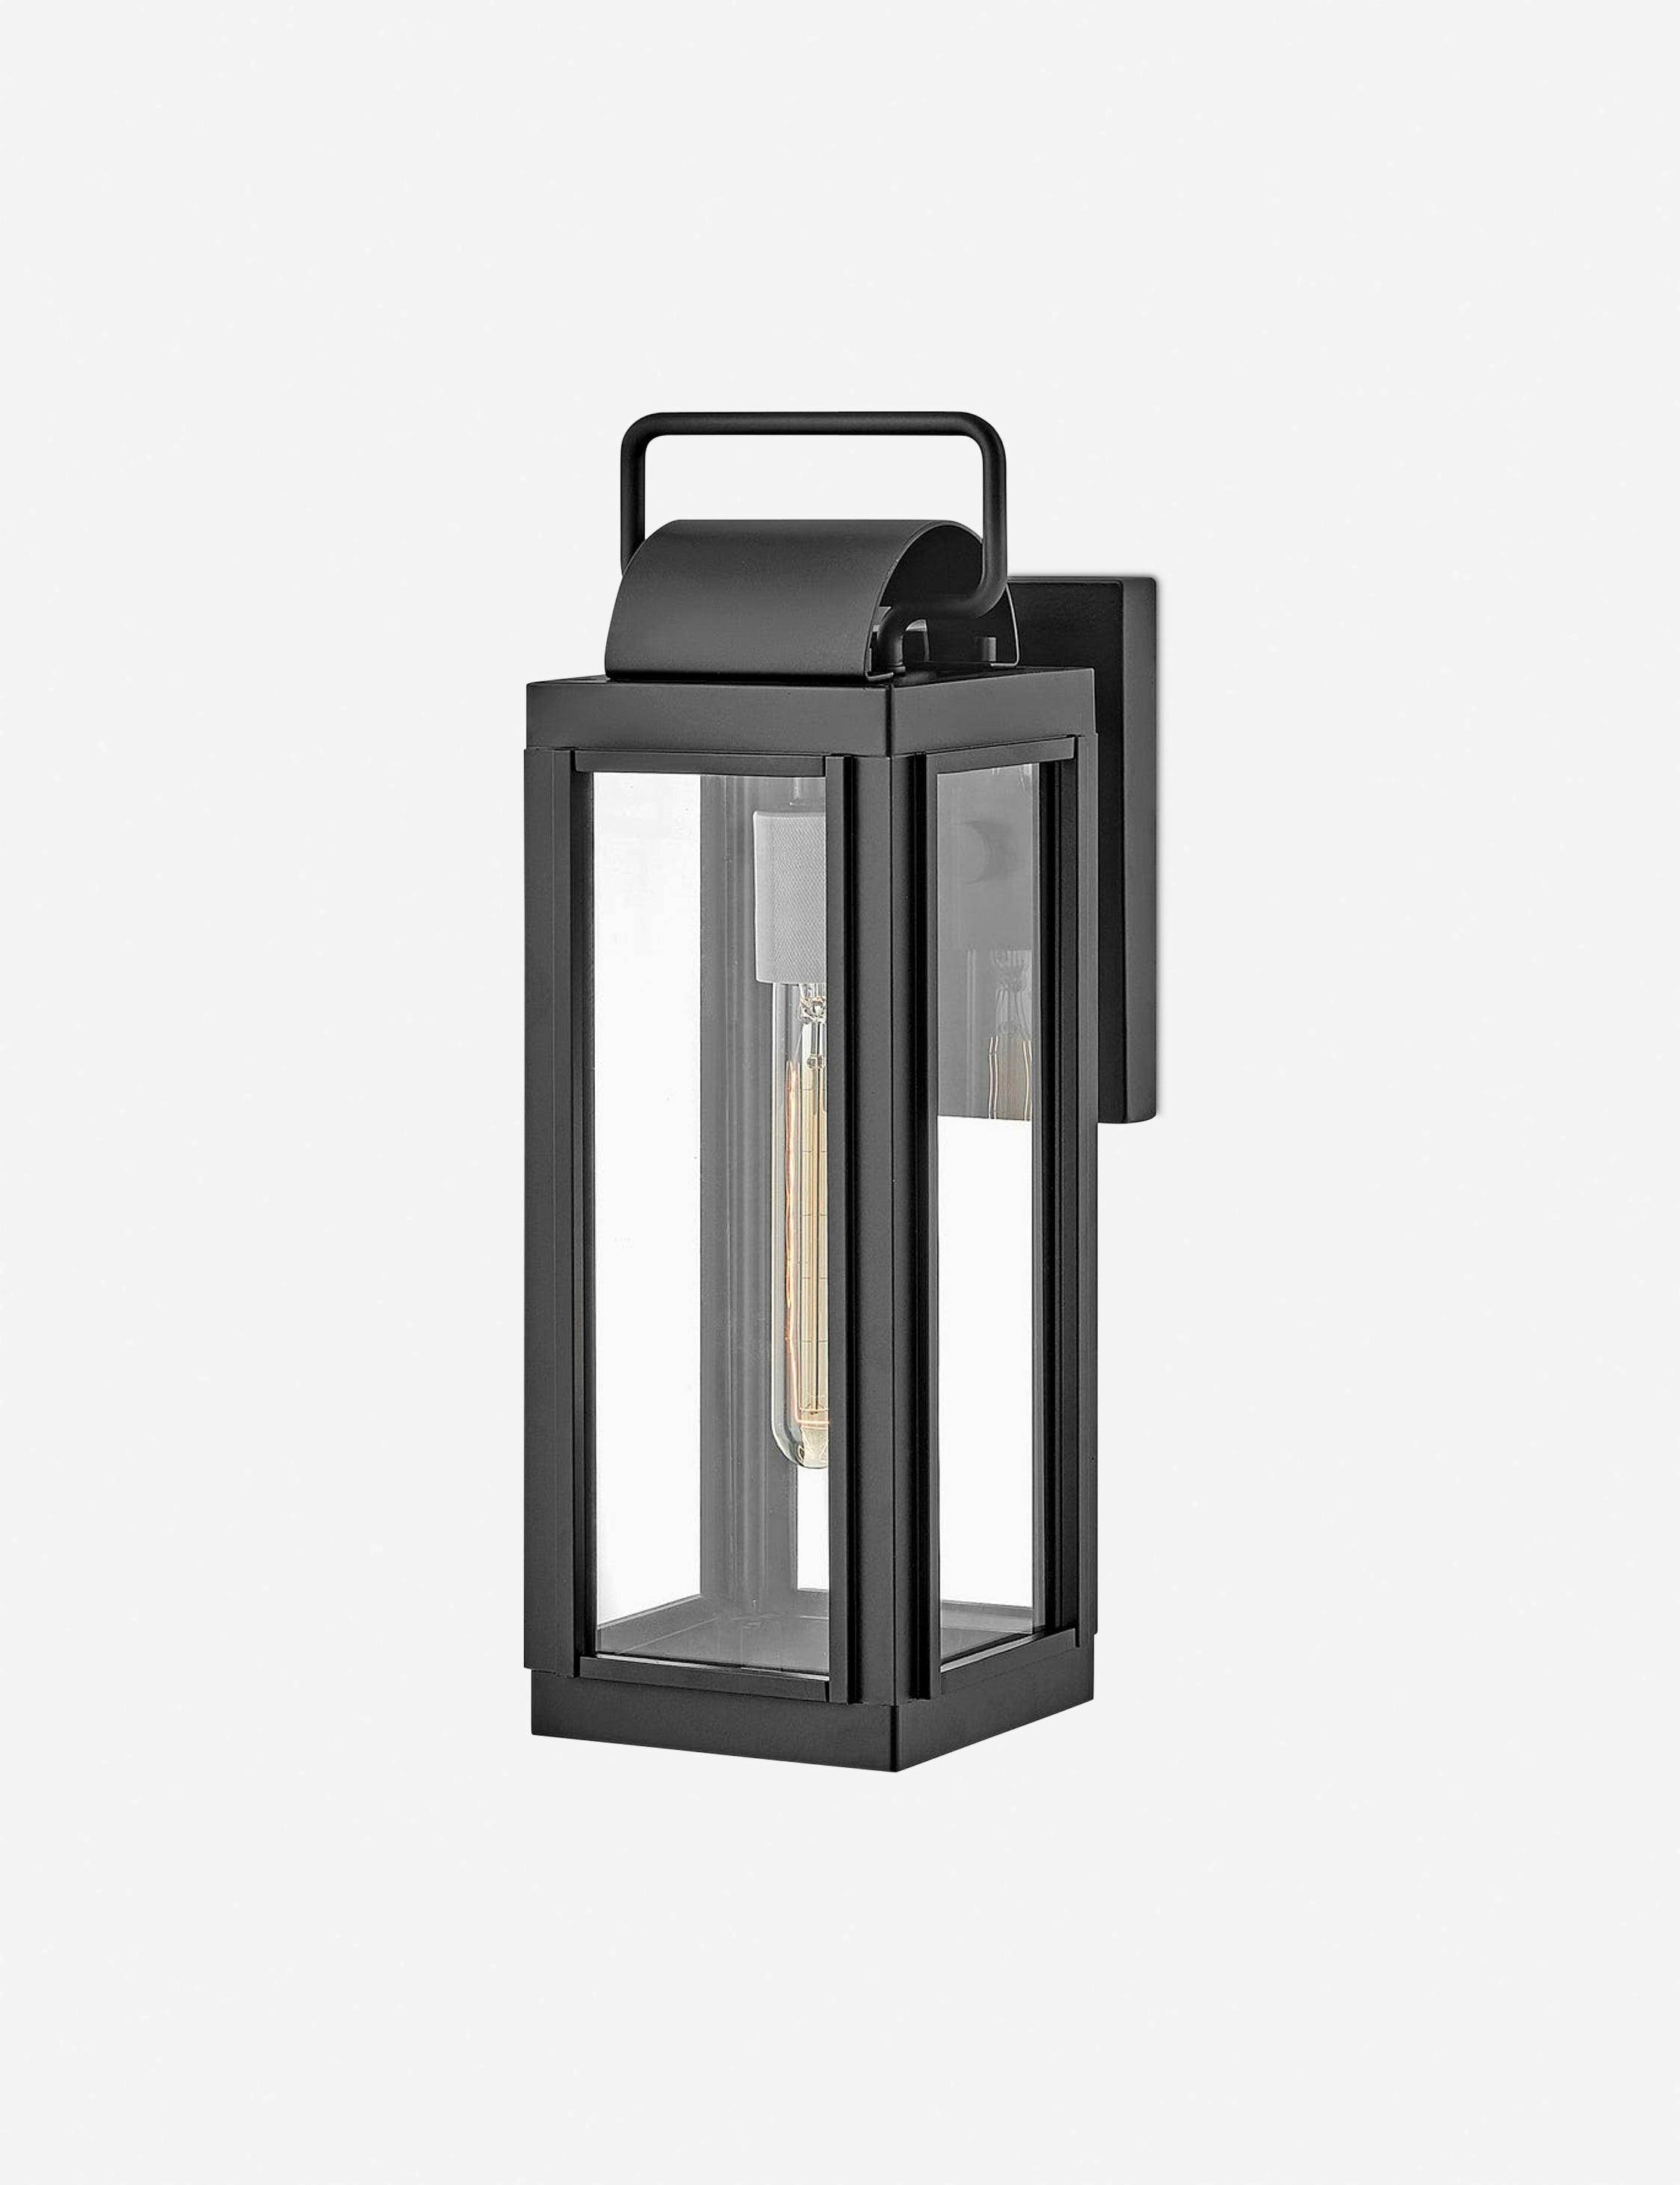 Sag Harbor Dimmable Black Lantern Wall Sconce with Clear Glass